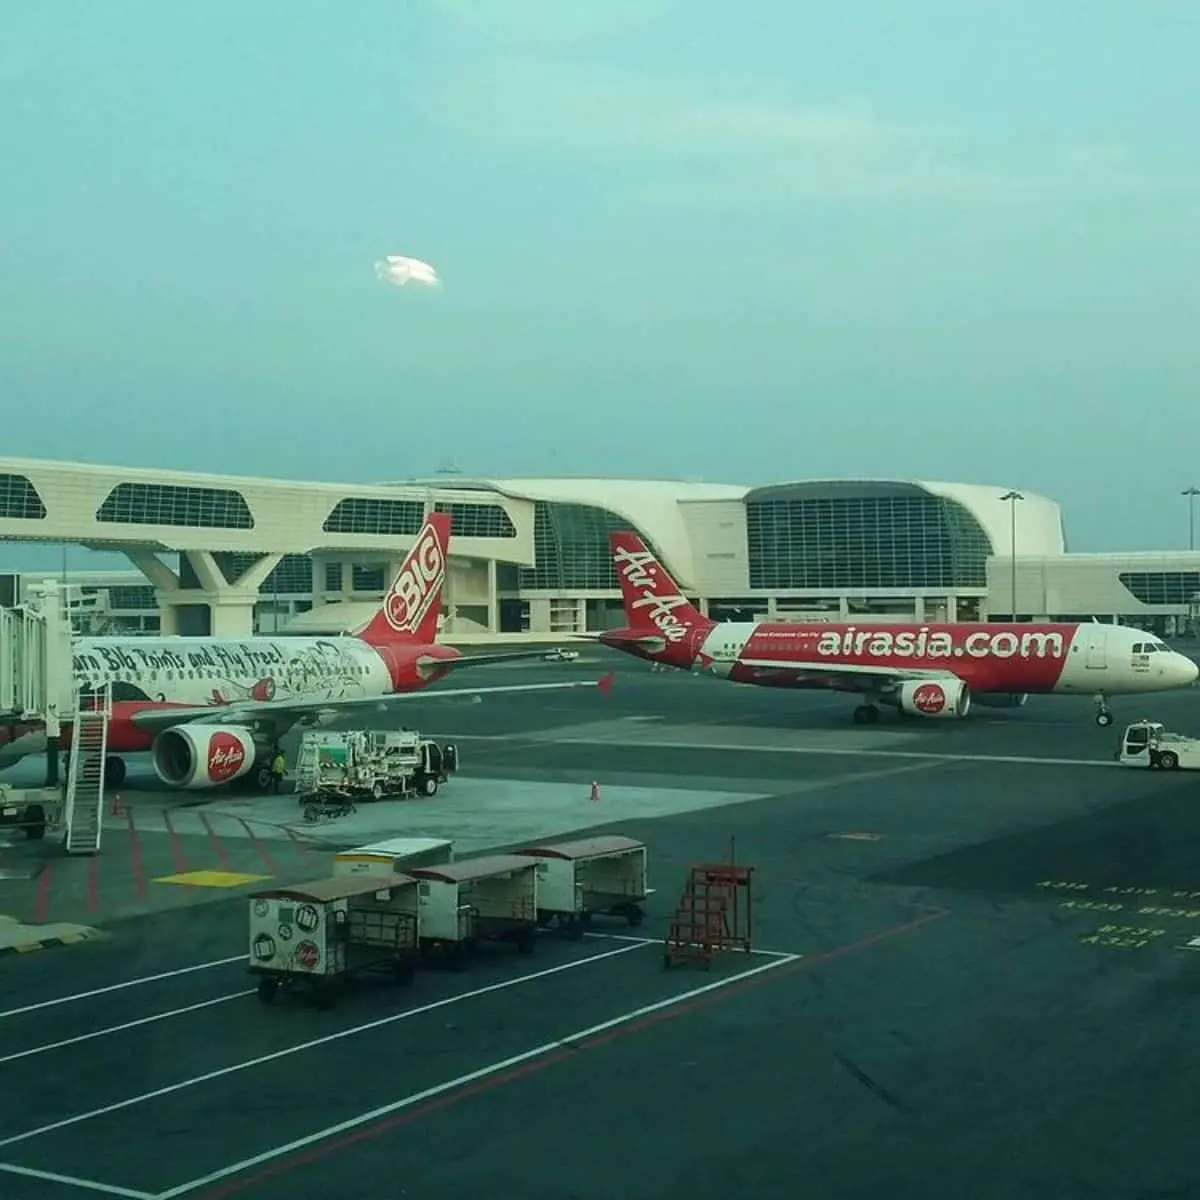 The vast KL Airport with AirAsia planes